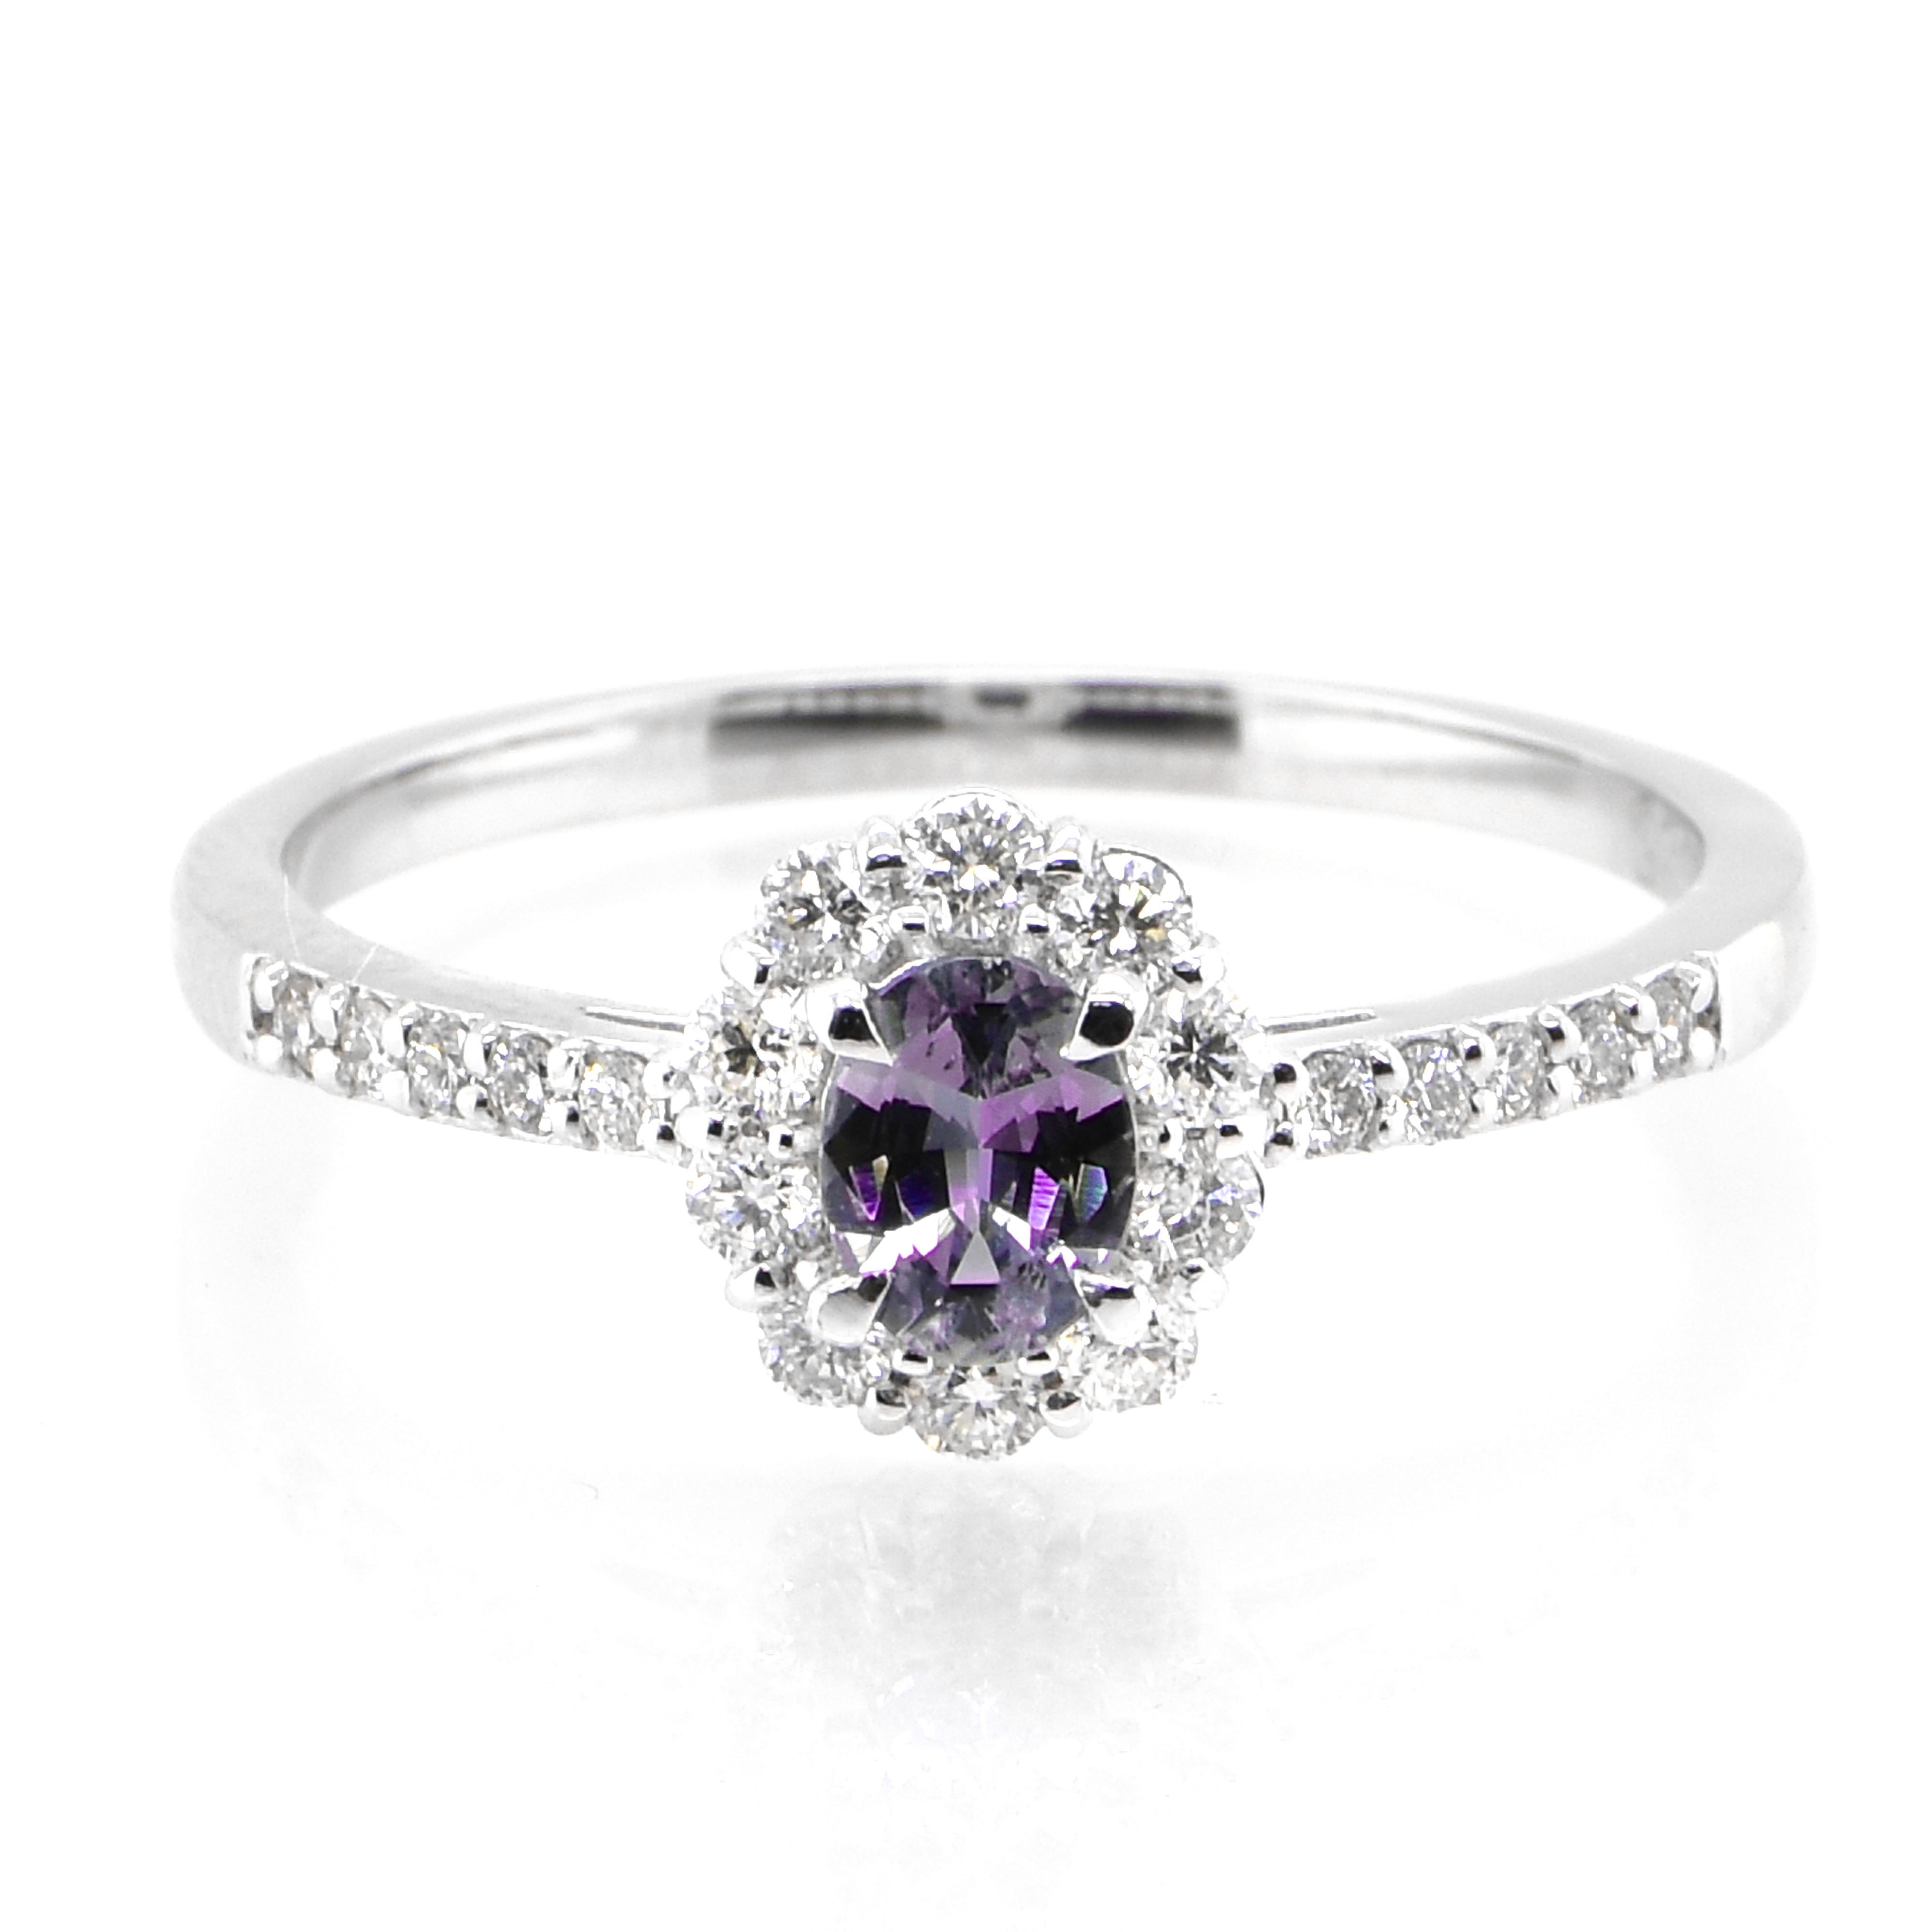 A gorgeous ring featuring 0.28 Carat, Natural Alexandrite and 0.25 Carats of Diamond Accents set in Platinum. Alexandrites produce a natural color-change phenomenon as they exhibit a Bluish Green Color under Fluorescent Light whereas a Purplish Red